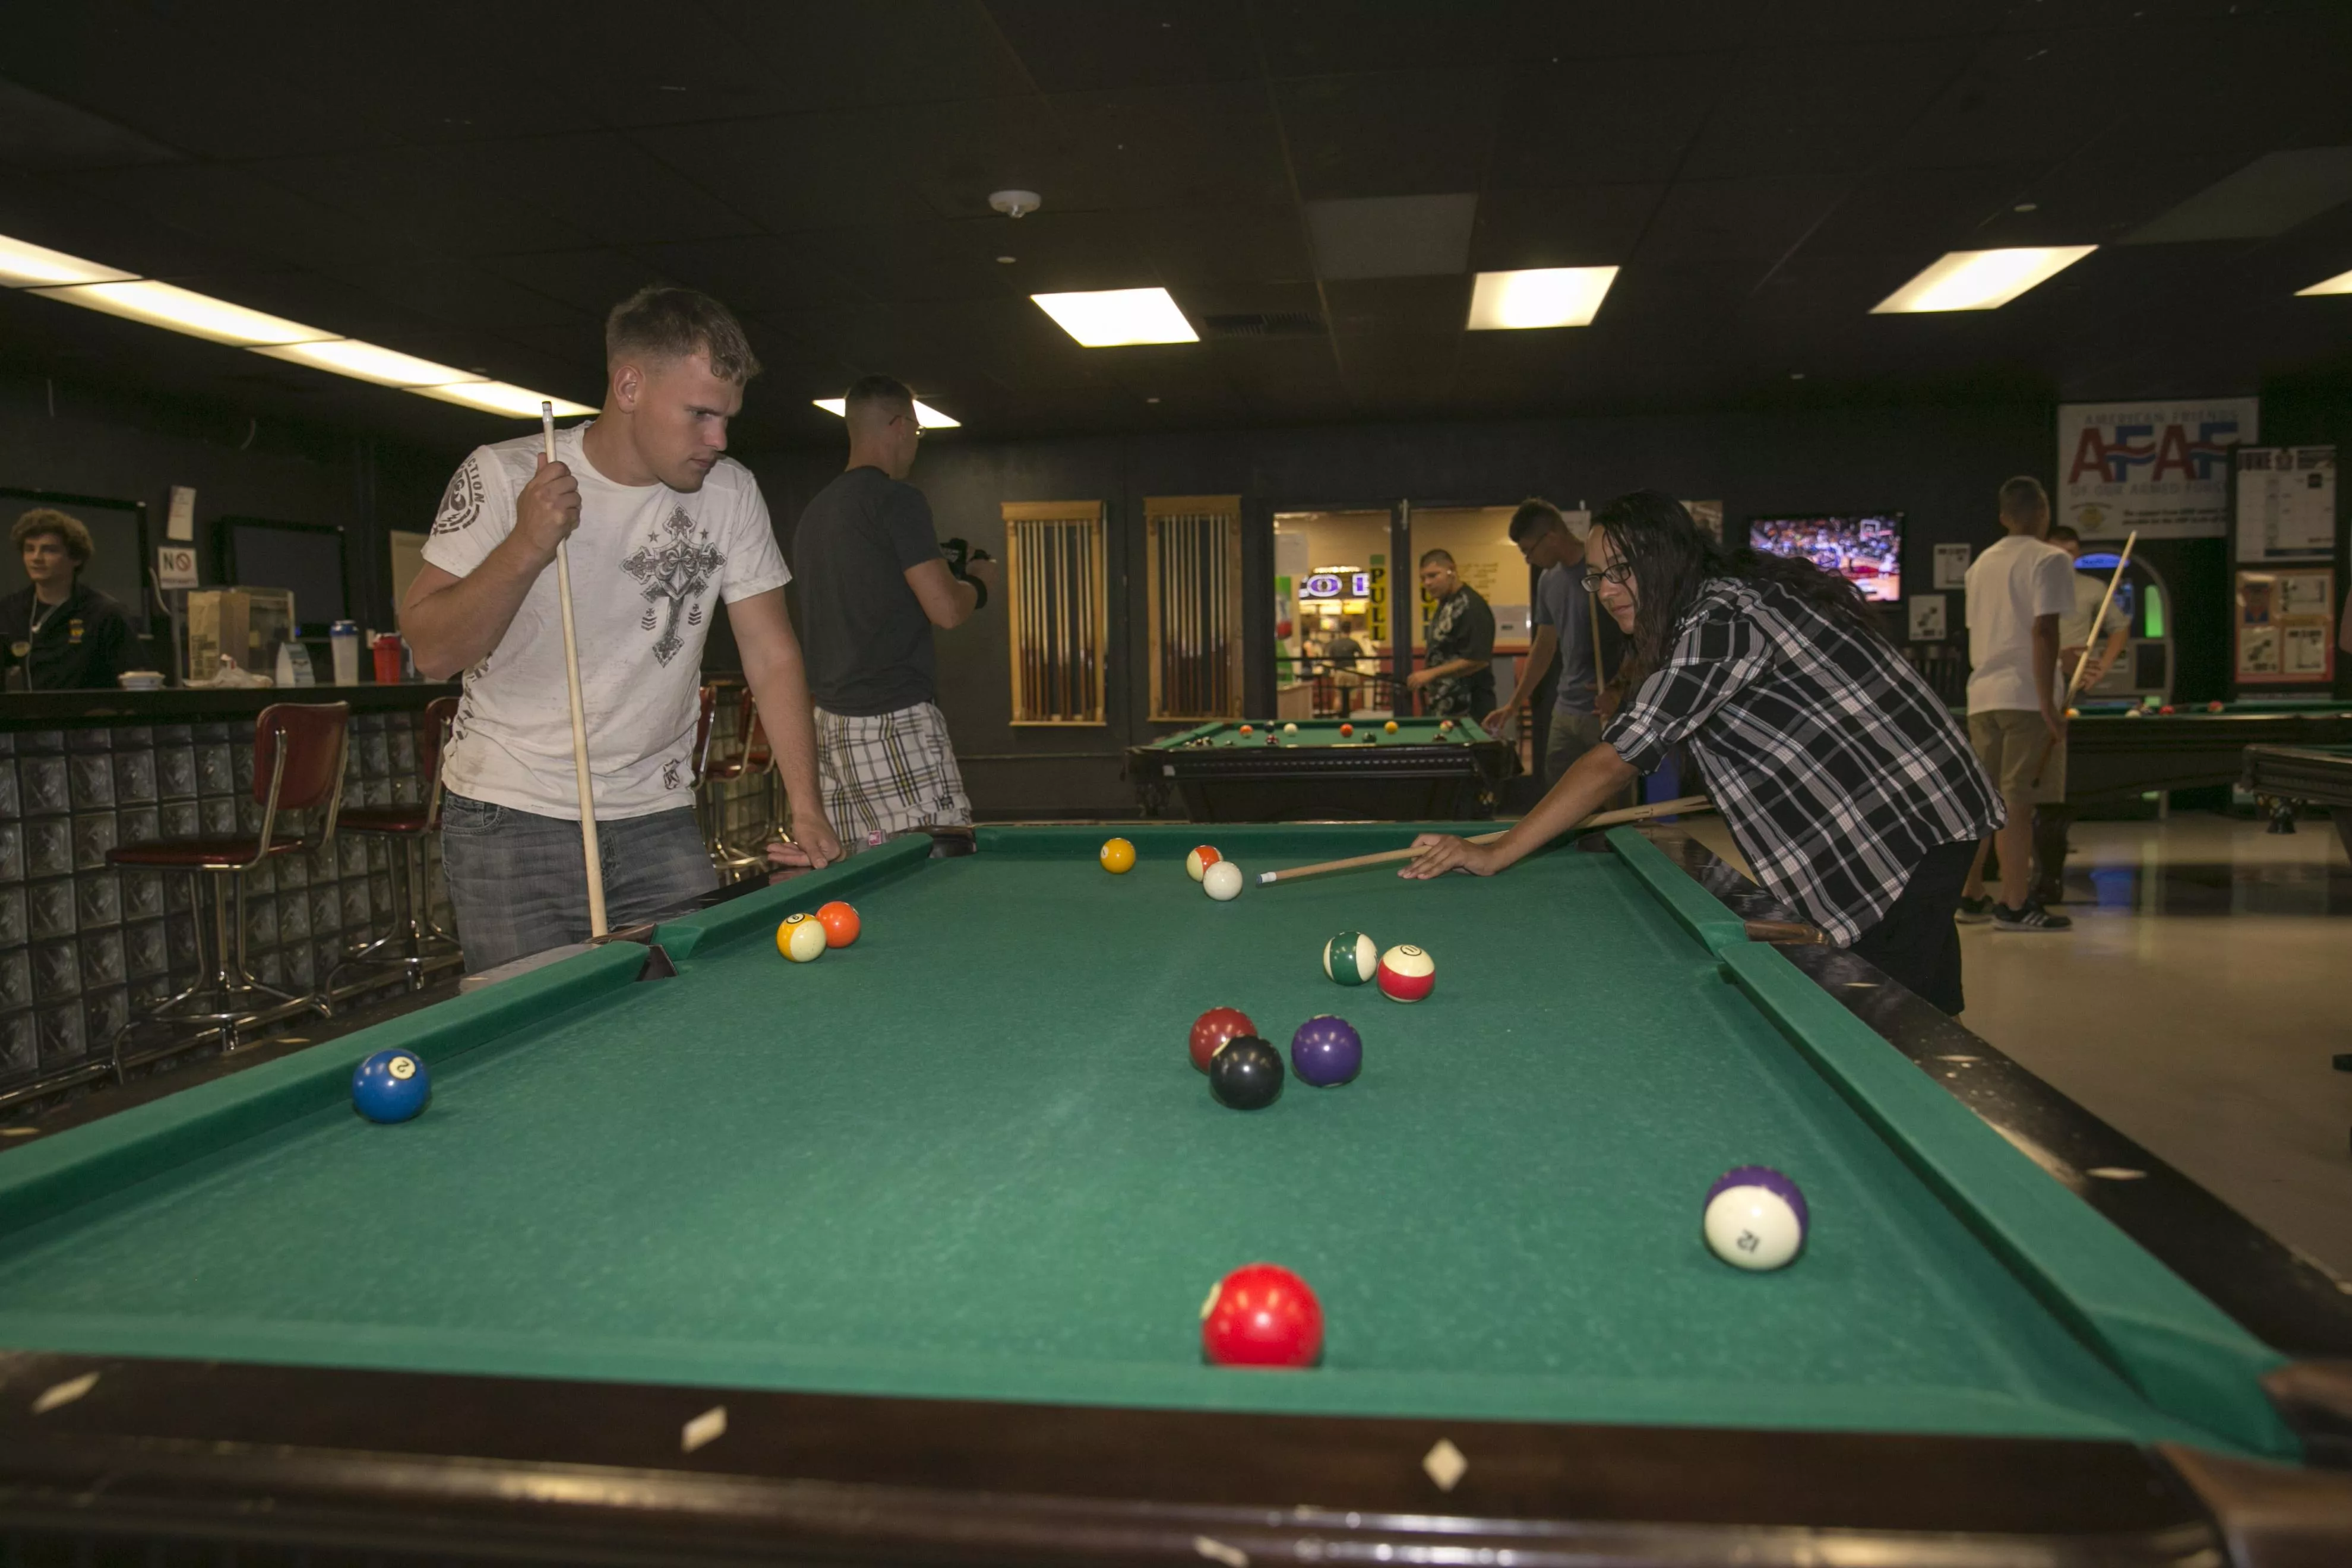 Billiards Club 8 in Colombia, South America | Billiards - Rated 3.8